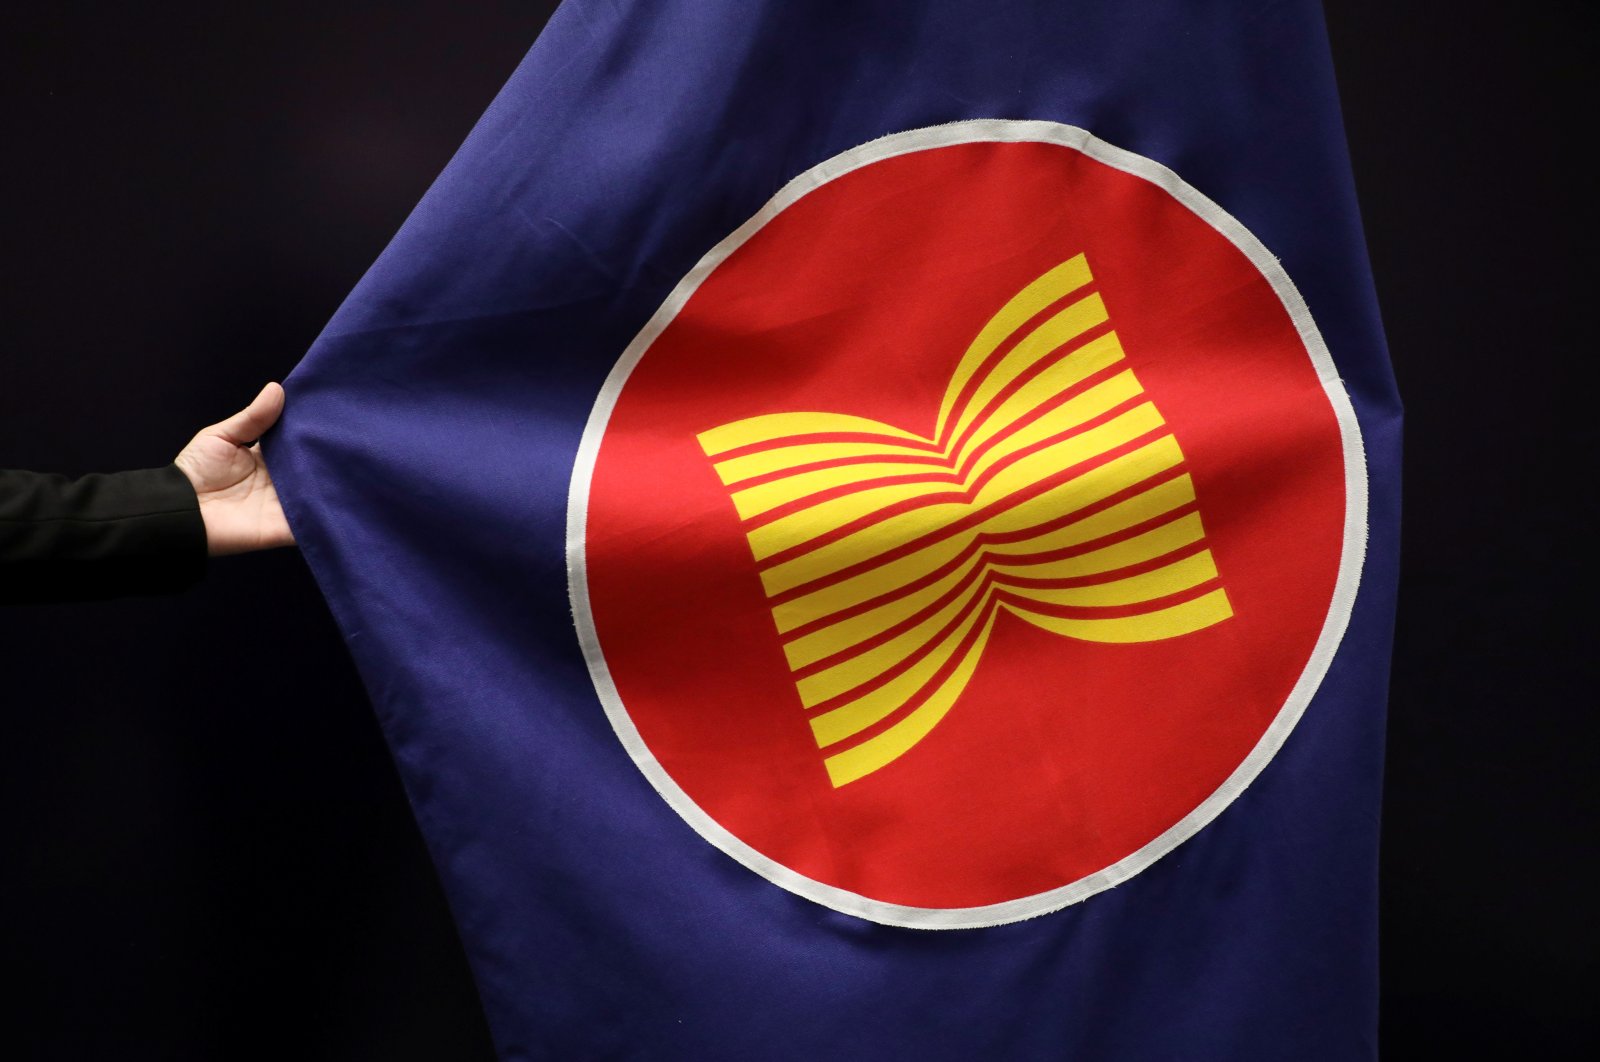 A worker adjusts an ASEAN flag at a meeting hall in Kuala Lumpur, Malaysia, Oct. 28, 2021. (REUTERS Photo)